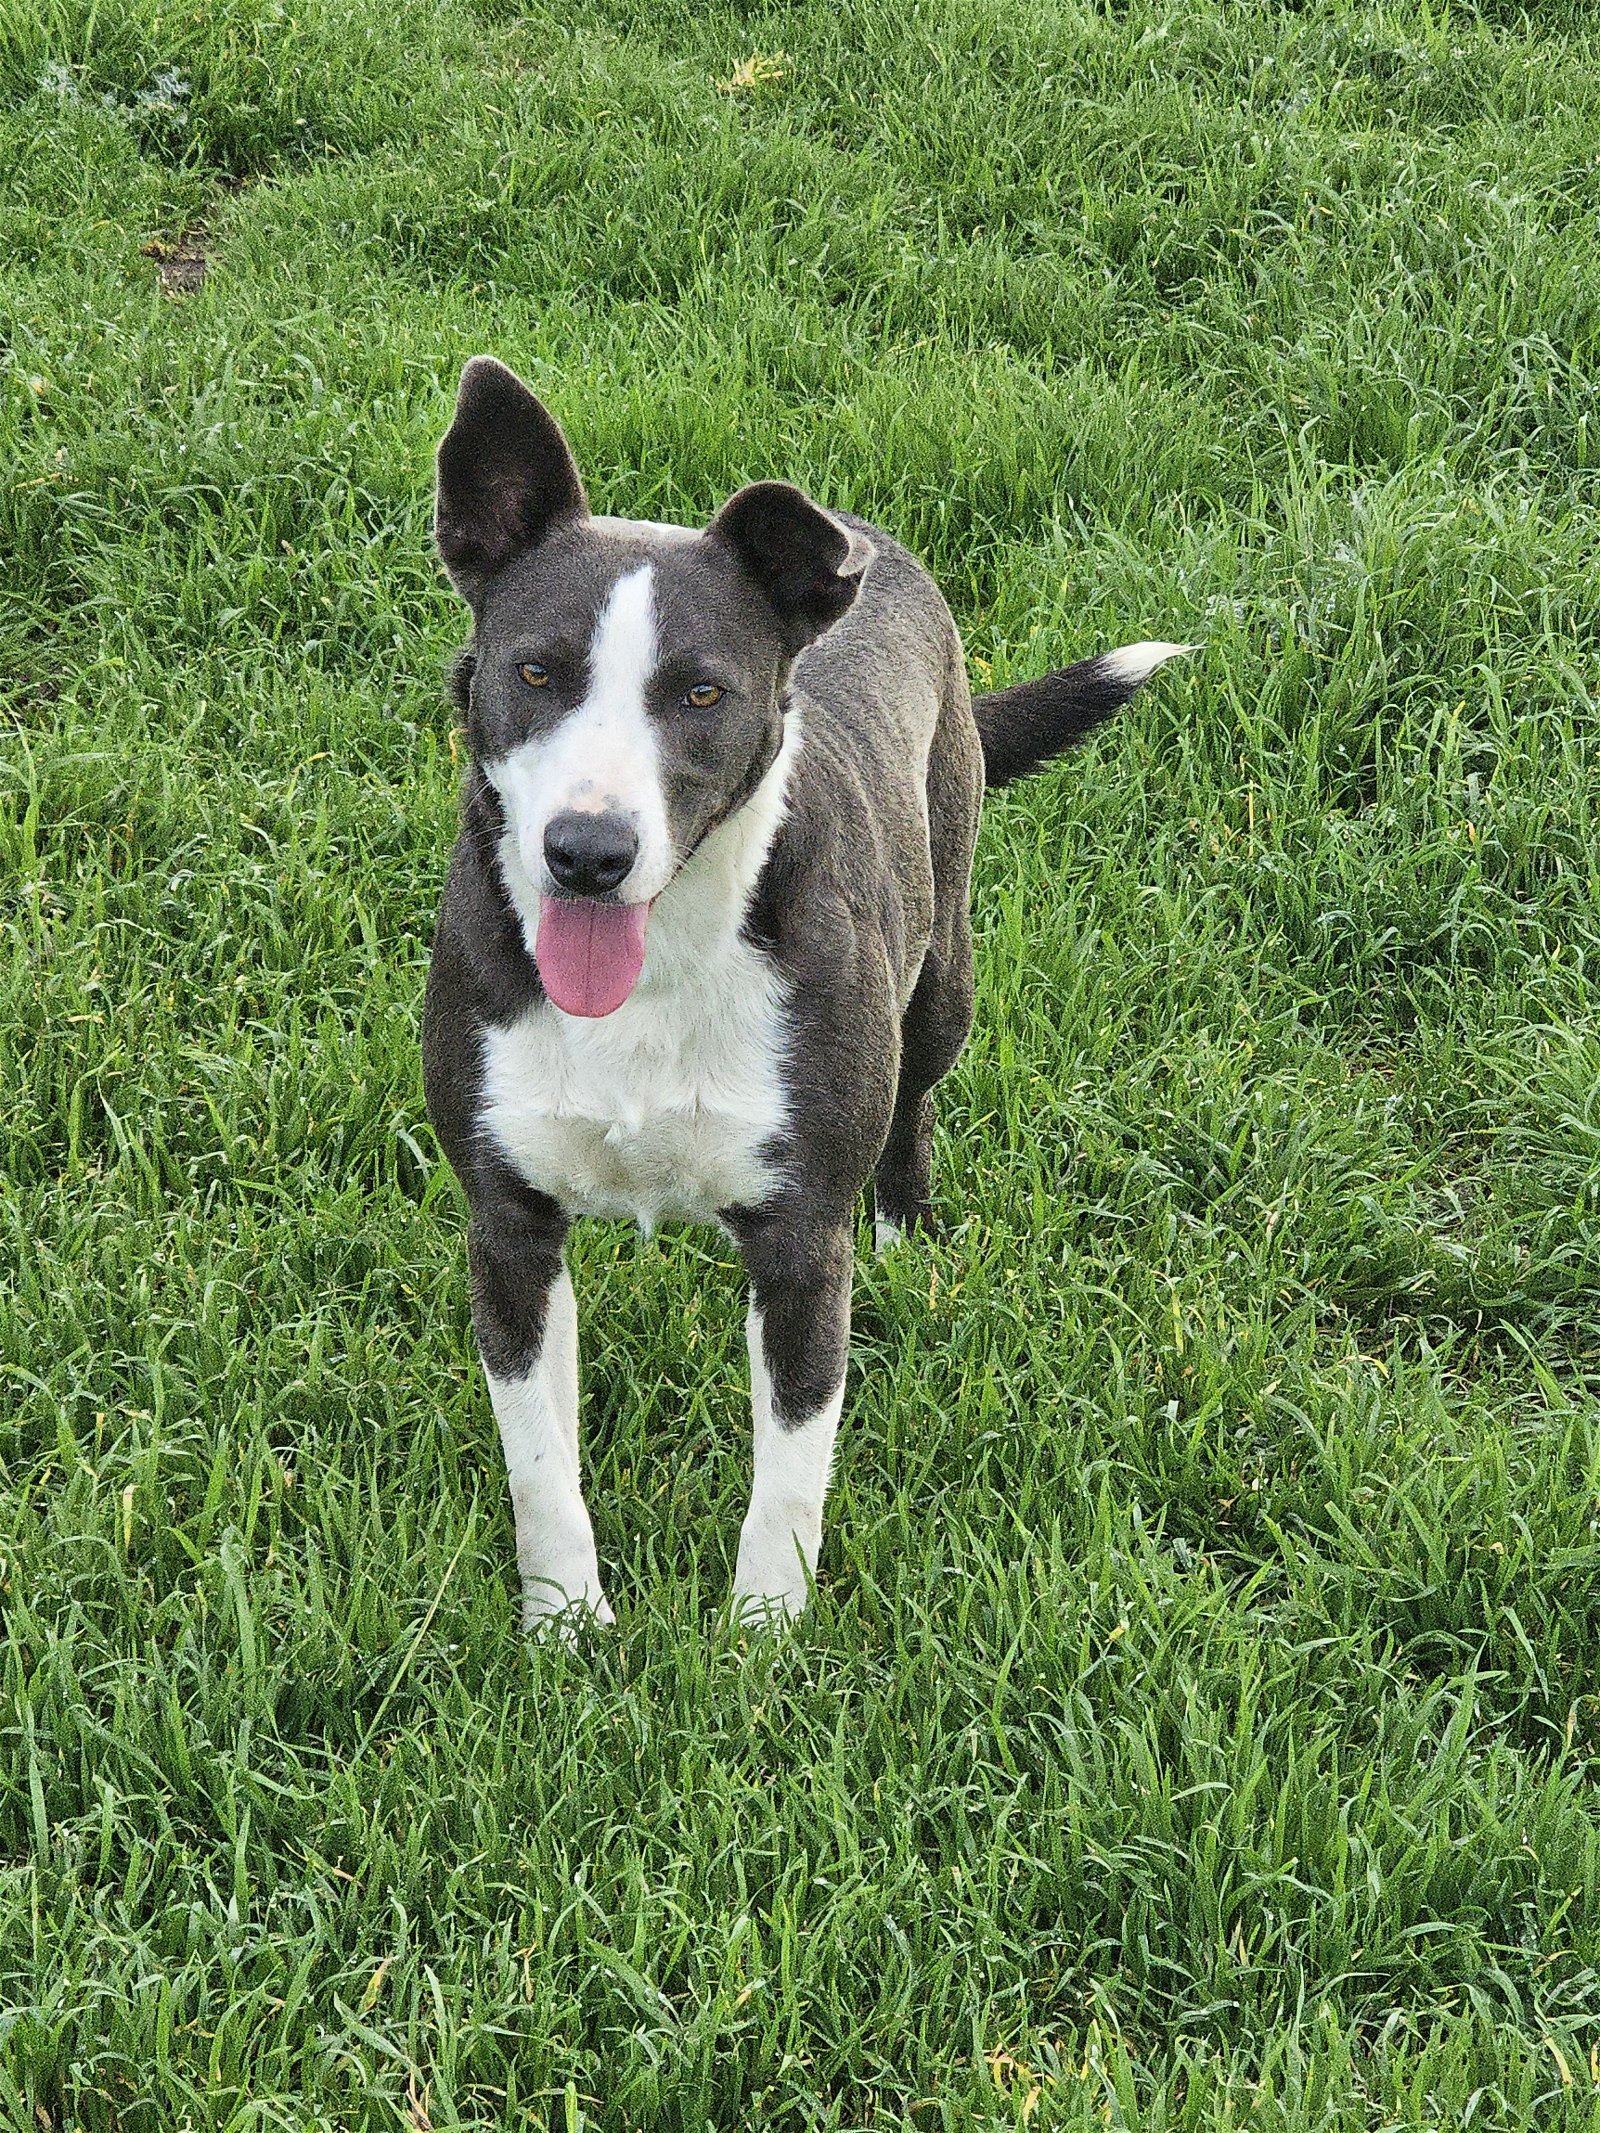 SNEAKERS, an adoptable Border Collie in Chico, CA, 95973 | Photo Image 1